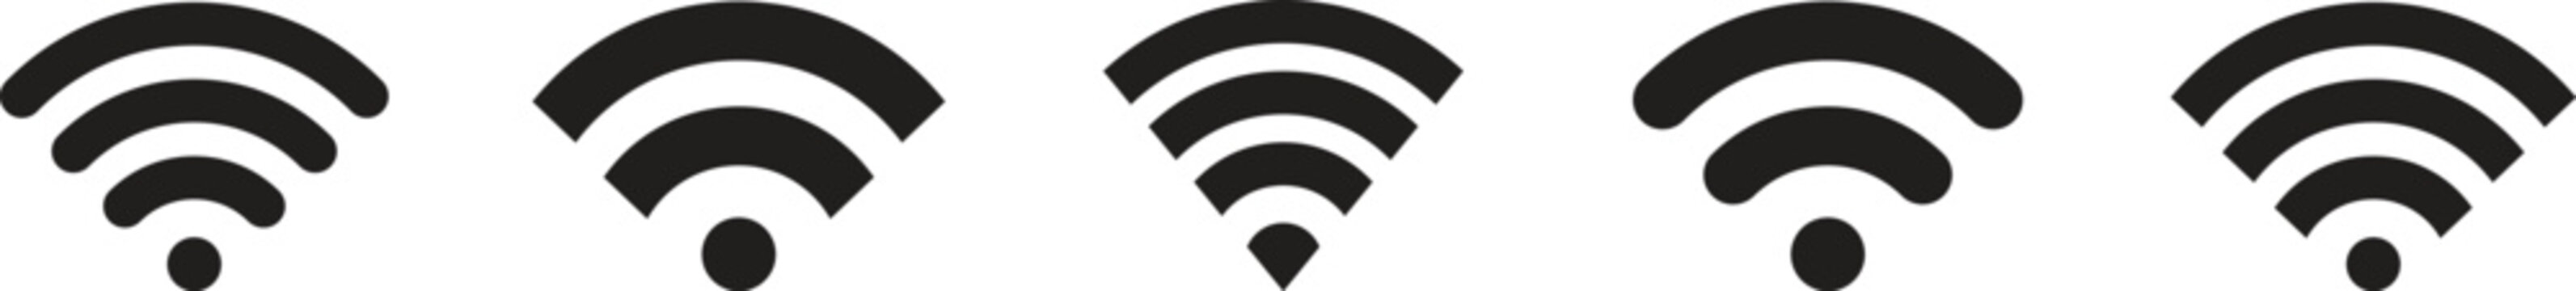 Wireless and wifi icon. Wi-fi signal symbol. Internet Connection. Remote internet access collection.